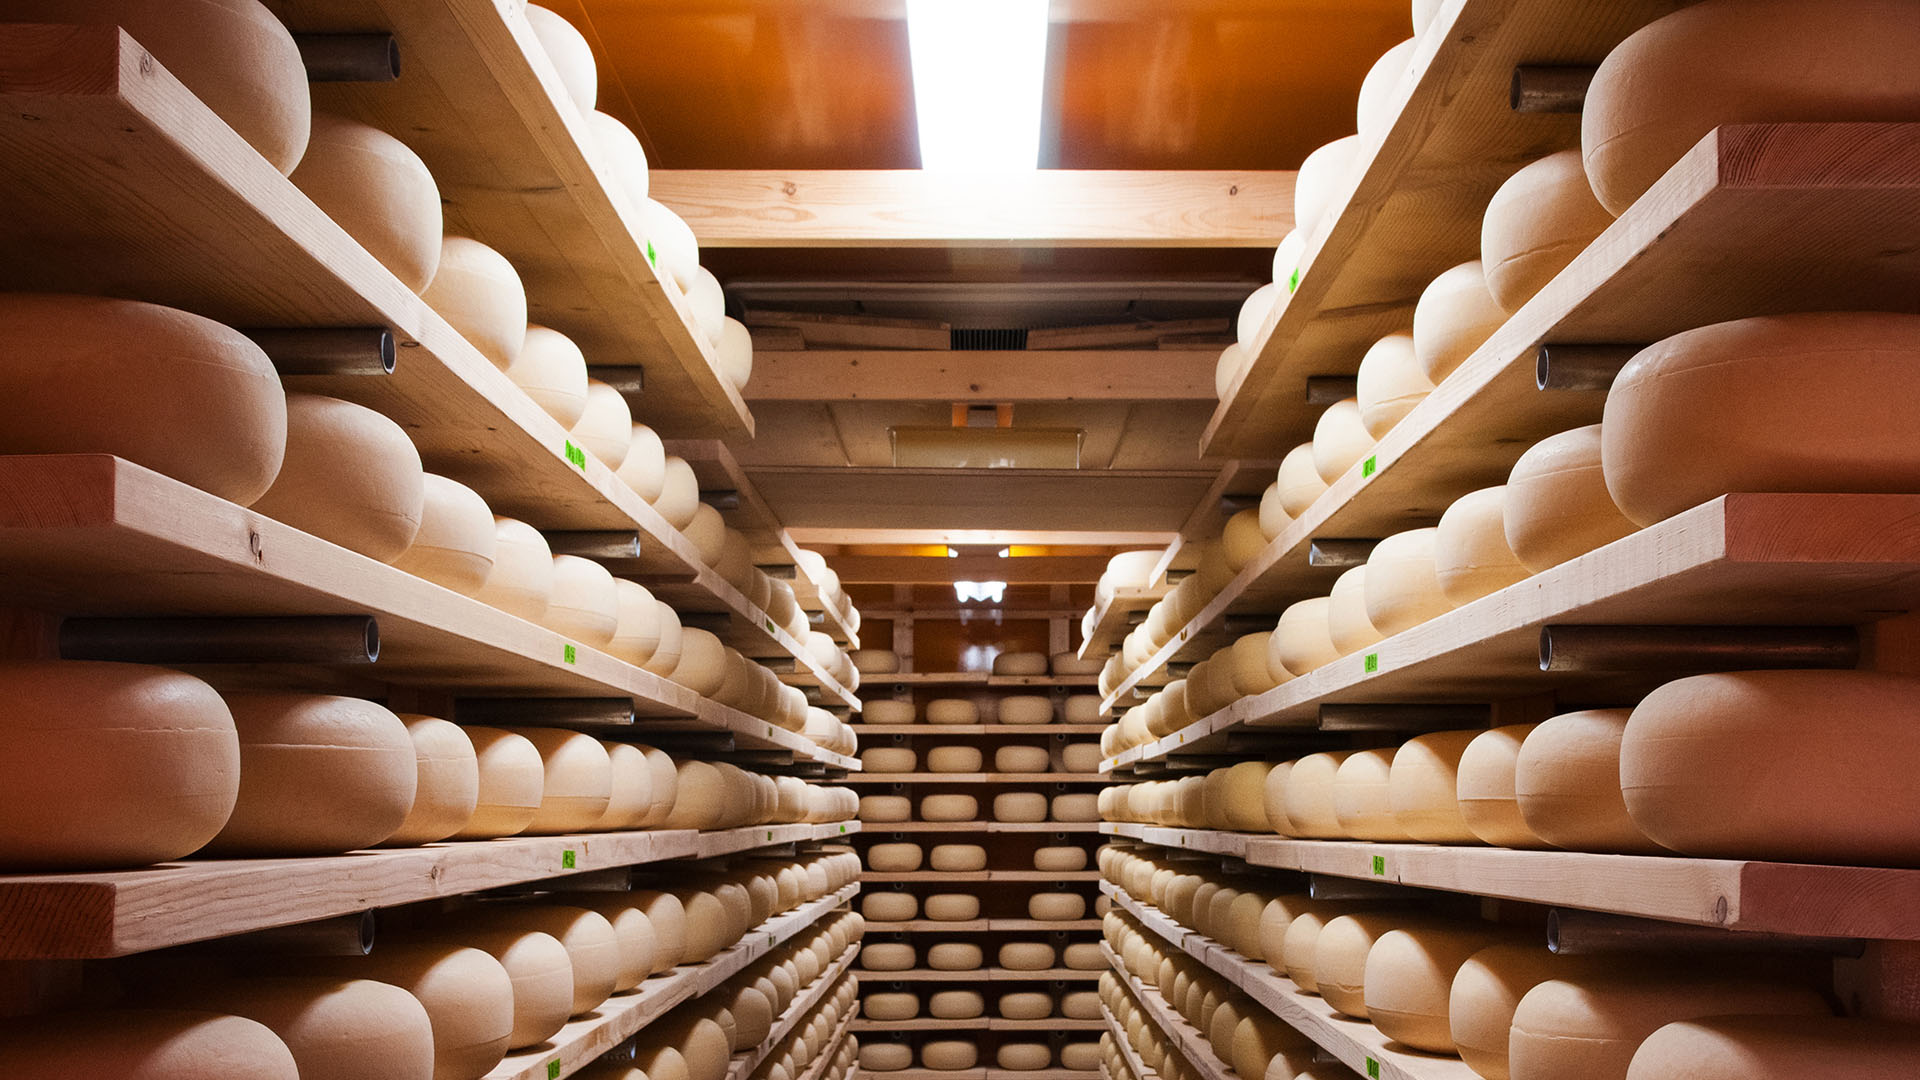 Rows of shelving containing large wheels of aging cheese.